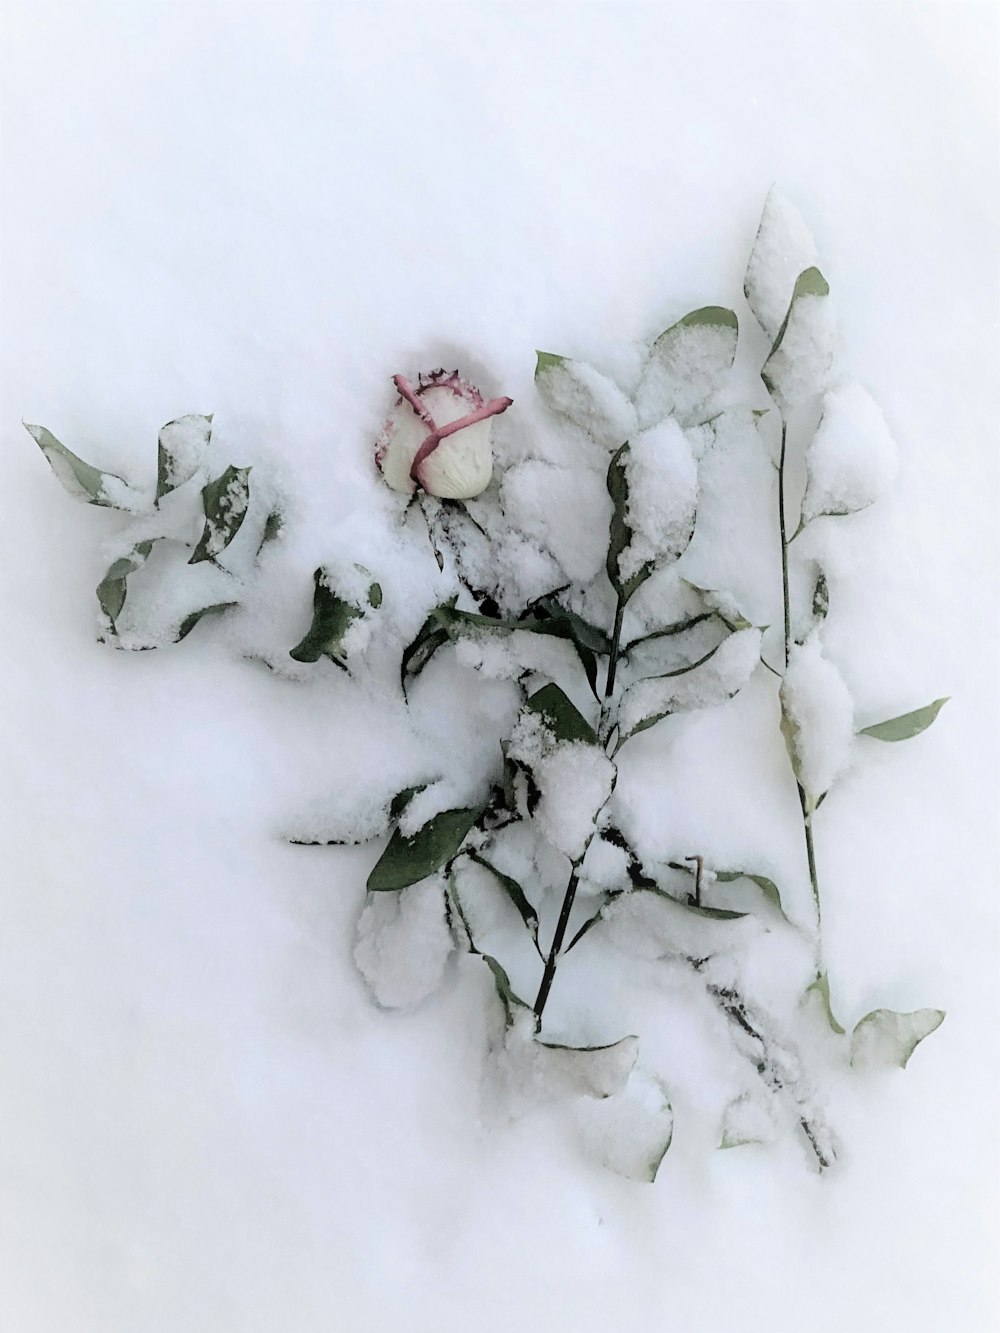 red rose on snow covered ground